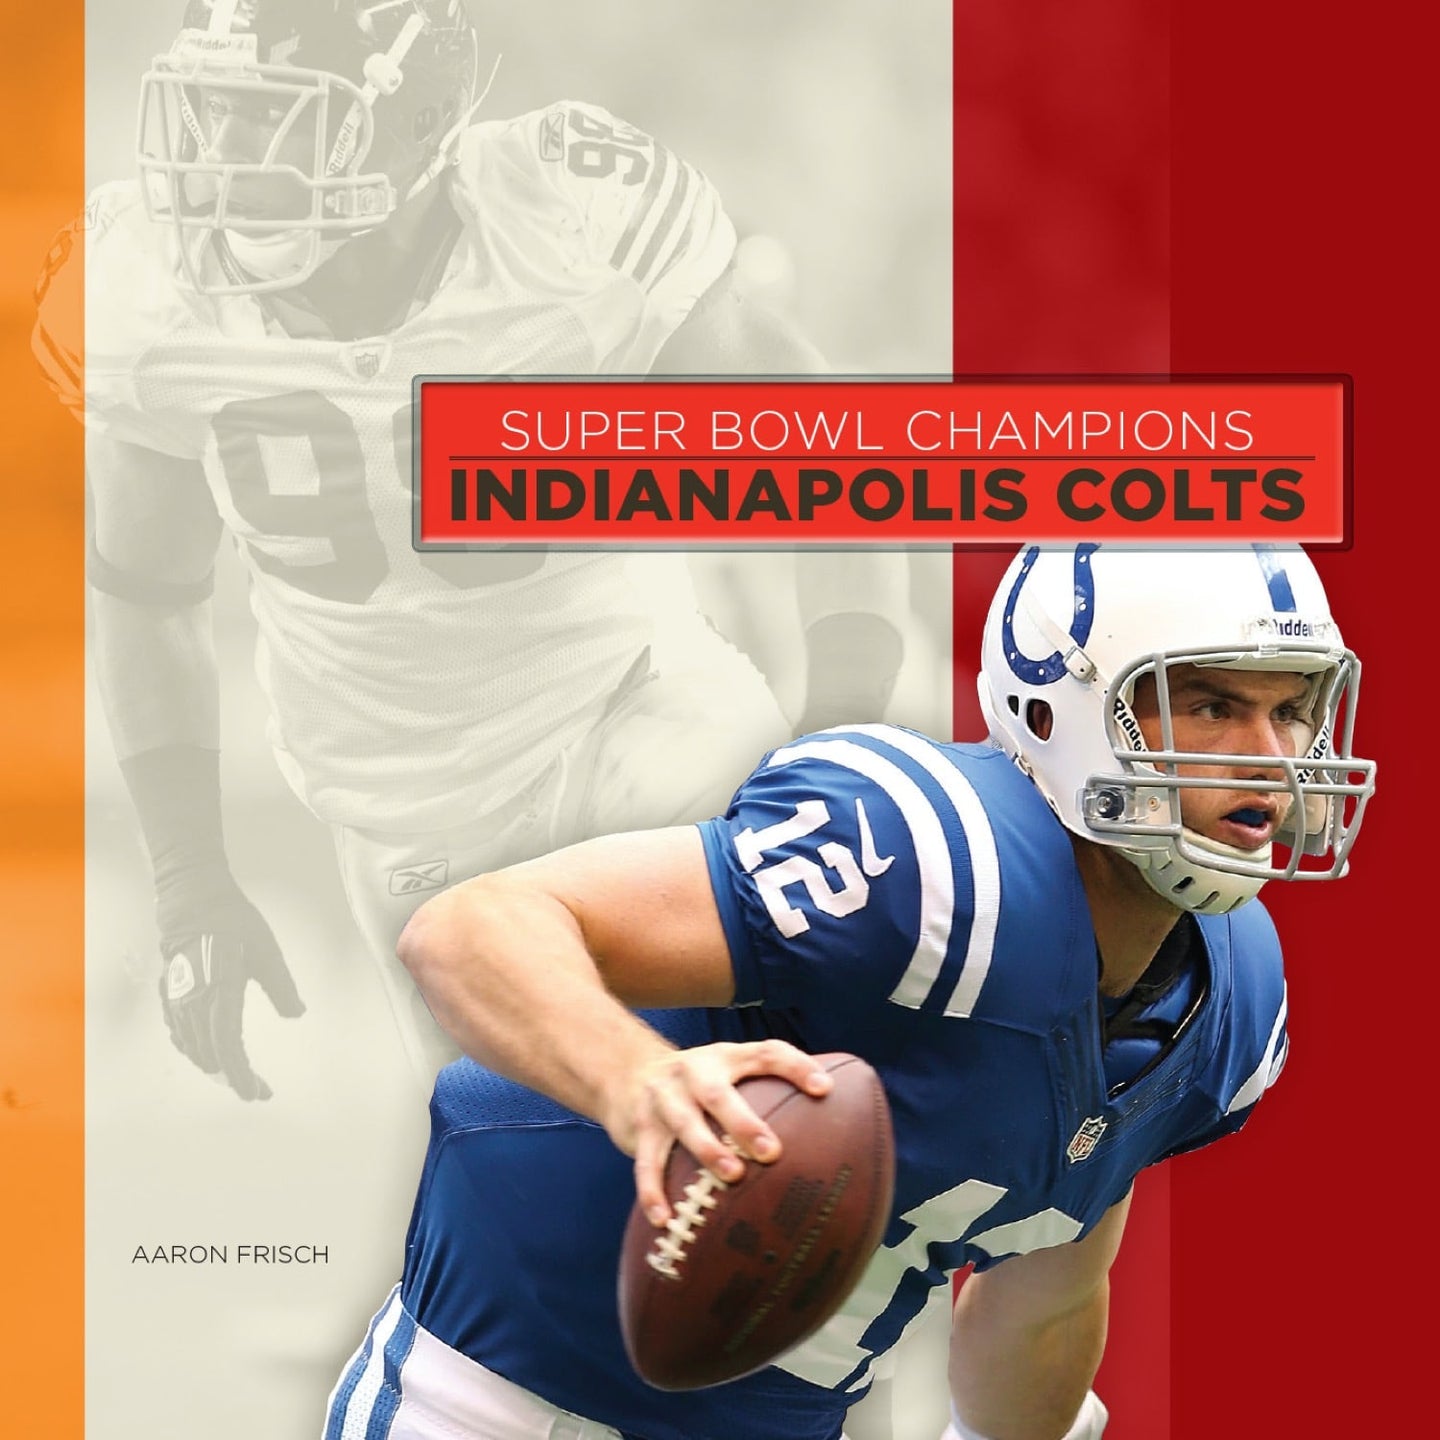 Super-Bowl-Sieger: Indianapolis Colts (2014)